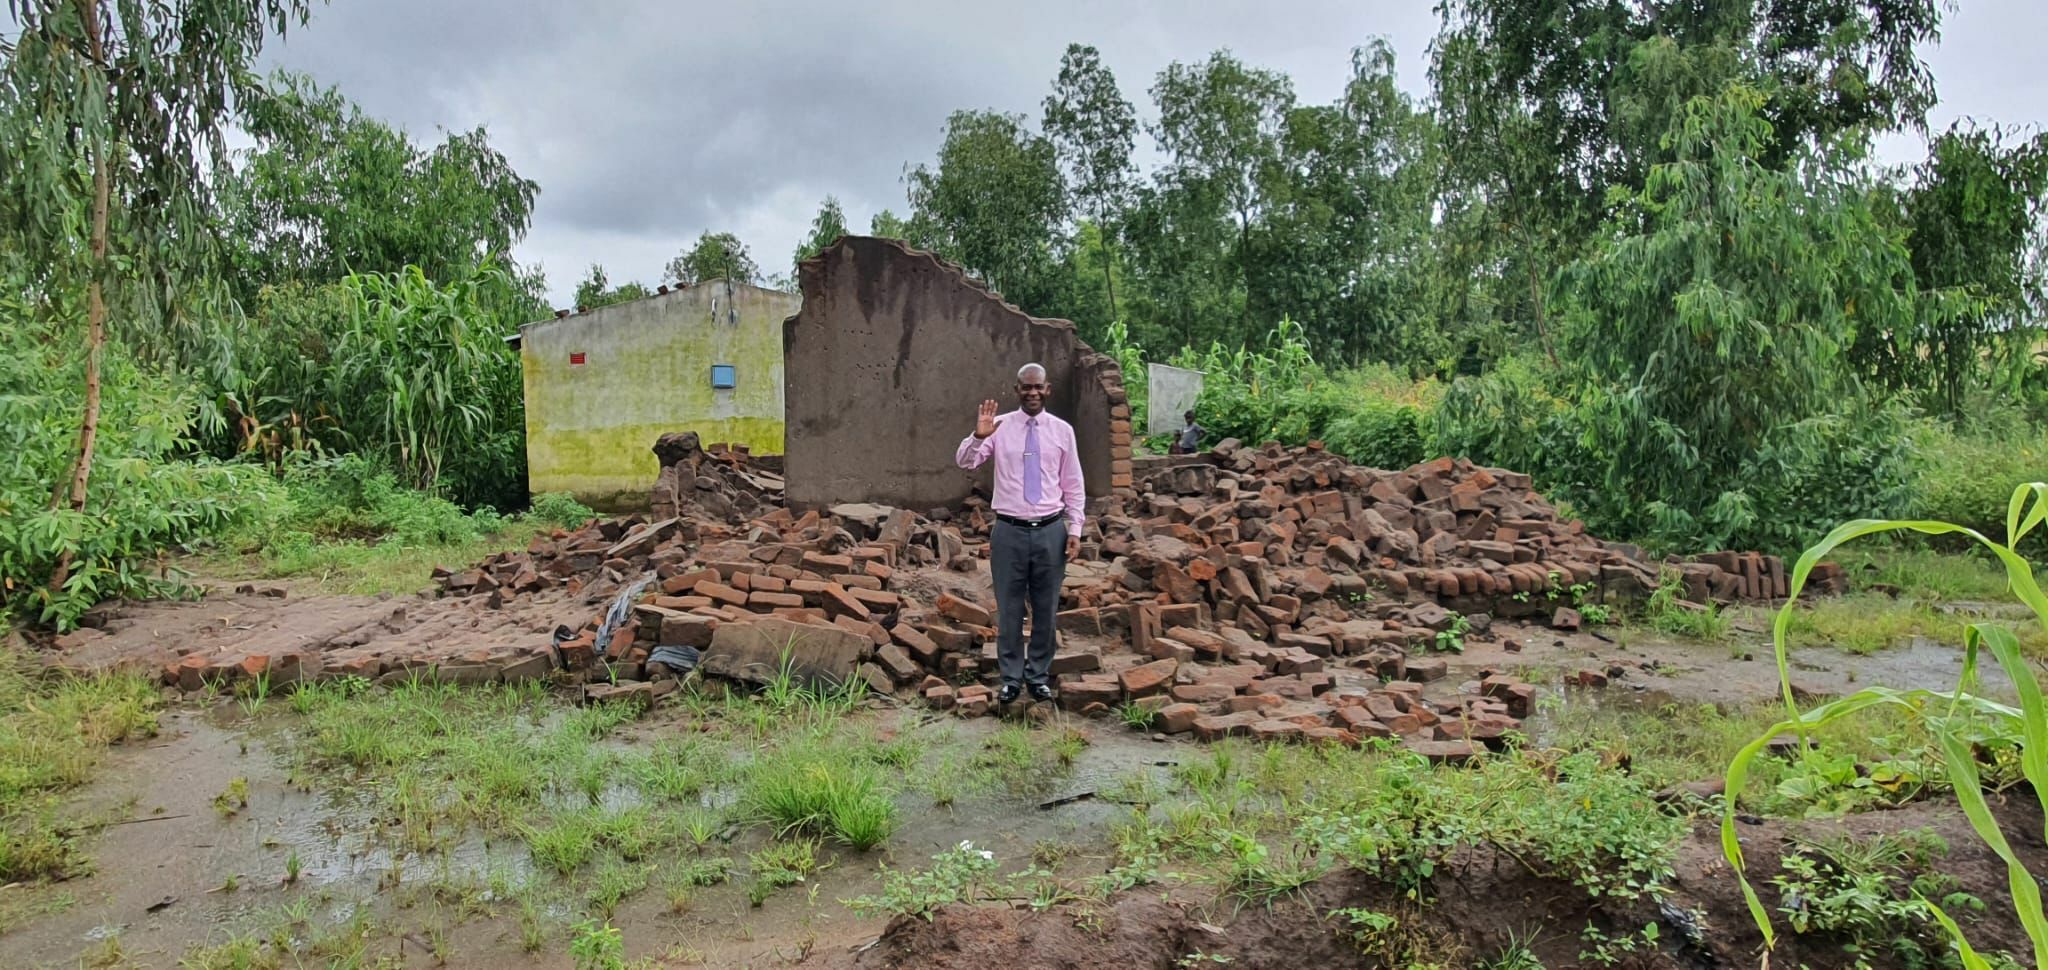 Pastor in front of what used to be his home in Malawi